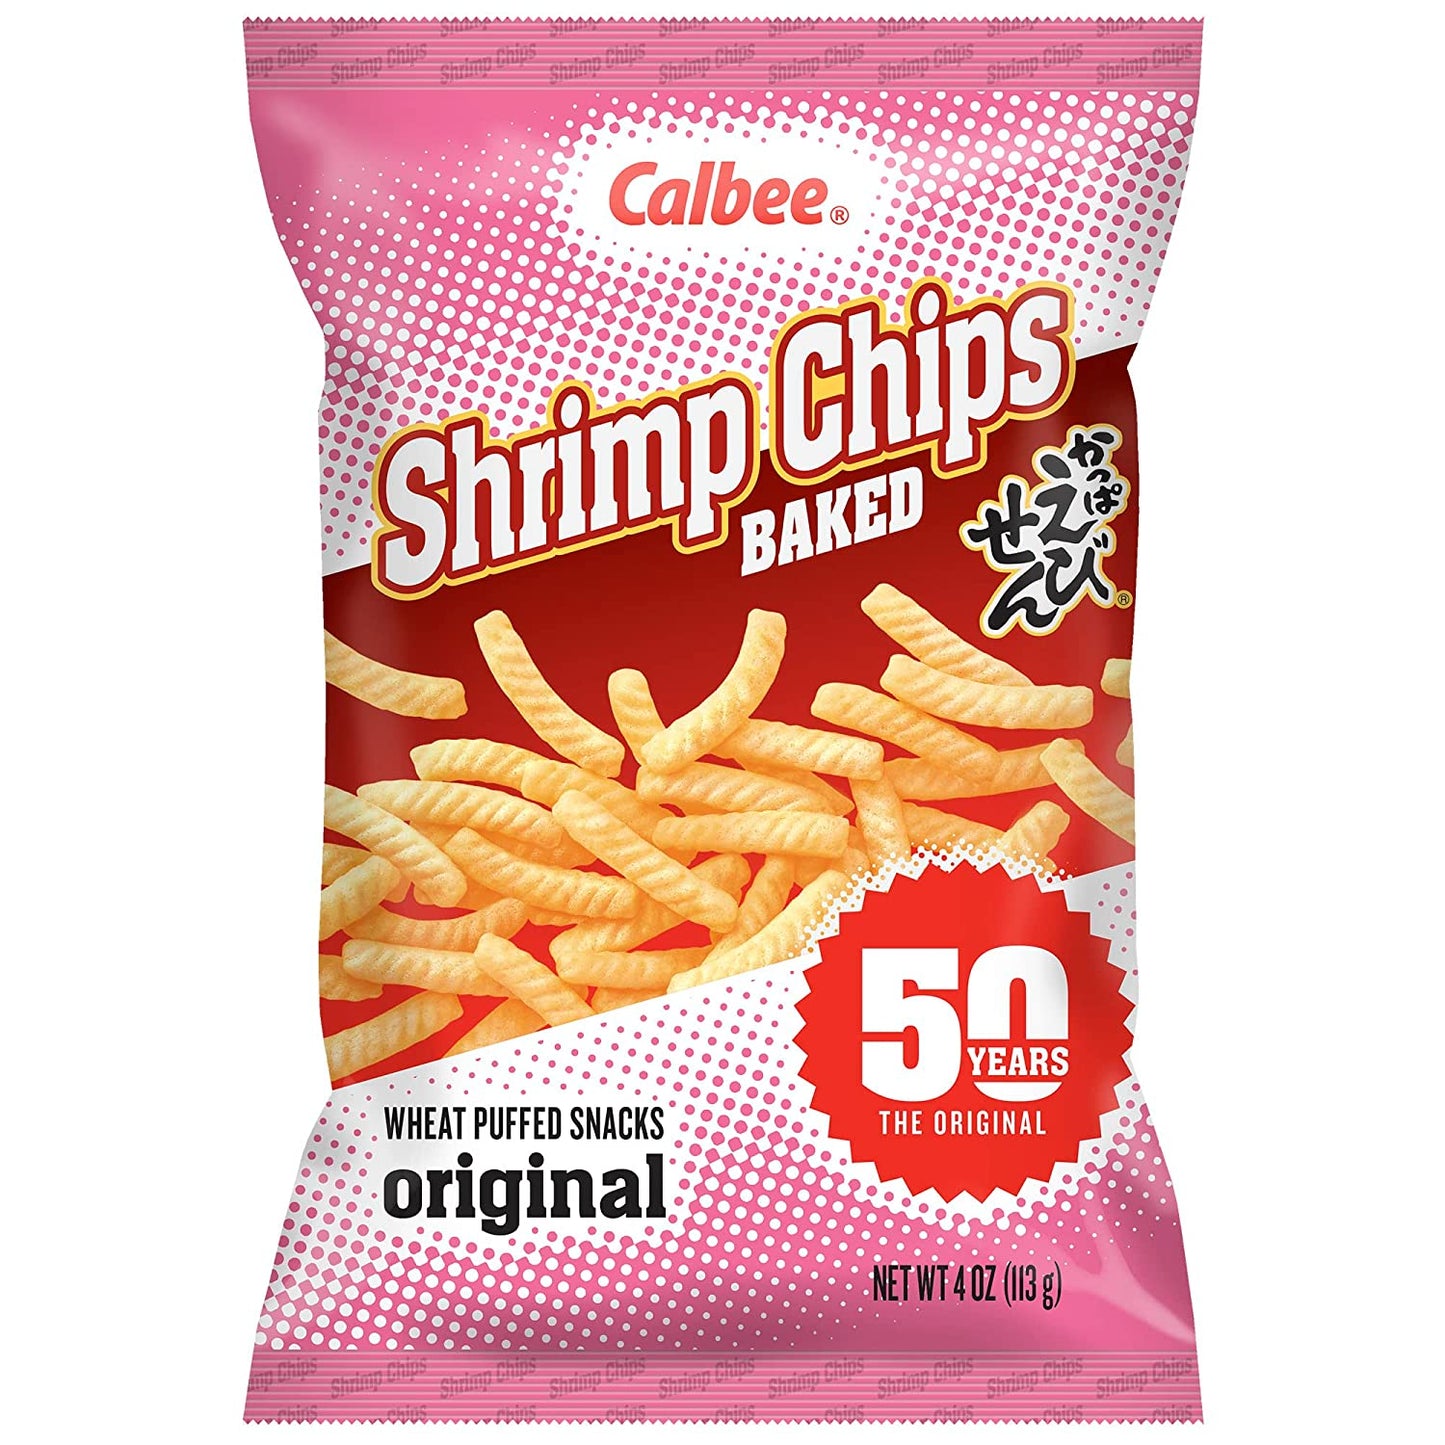 Calbee Shrimp Chips (Original, 4.0 oz) | Japanese Chips Made With Real Wild-Caught Shrimp & Baked To Crunchy Perfection | Indulge In Irresistible Shrimp Flavoured Chips (12 Pack)